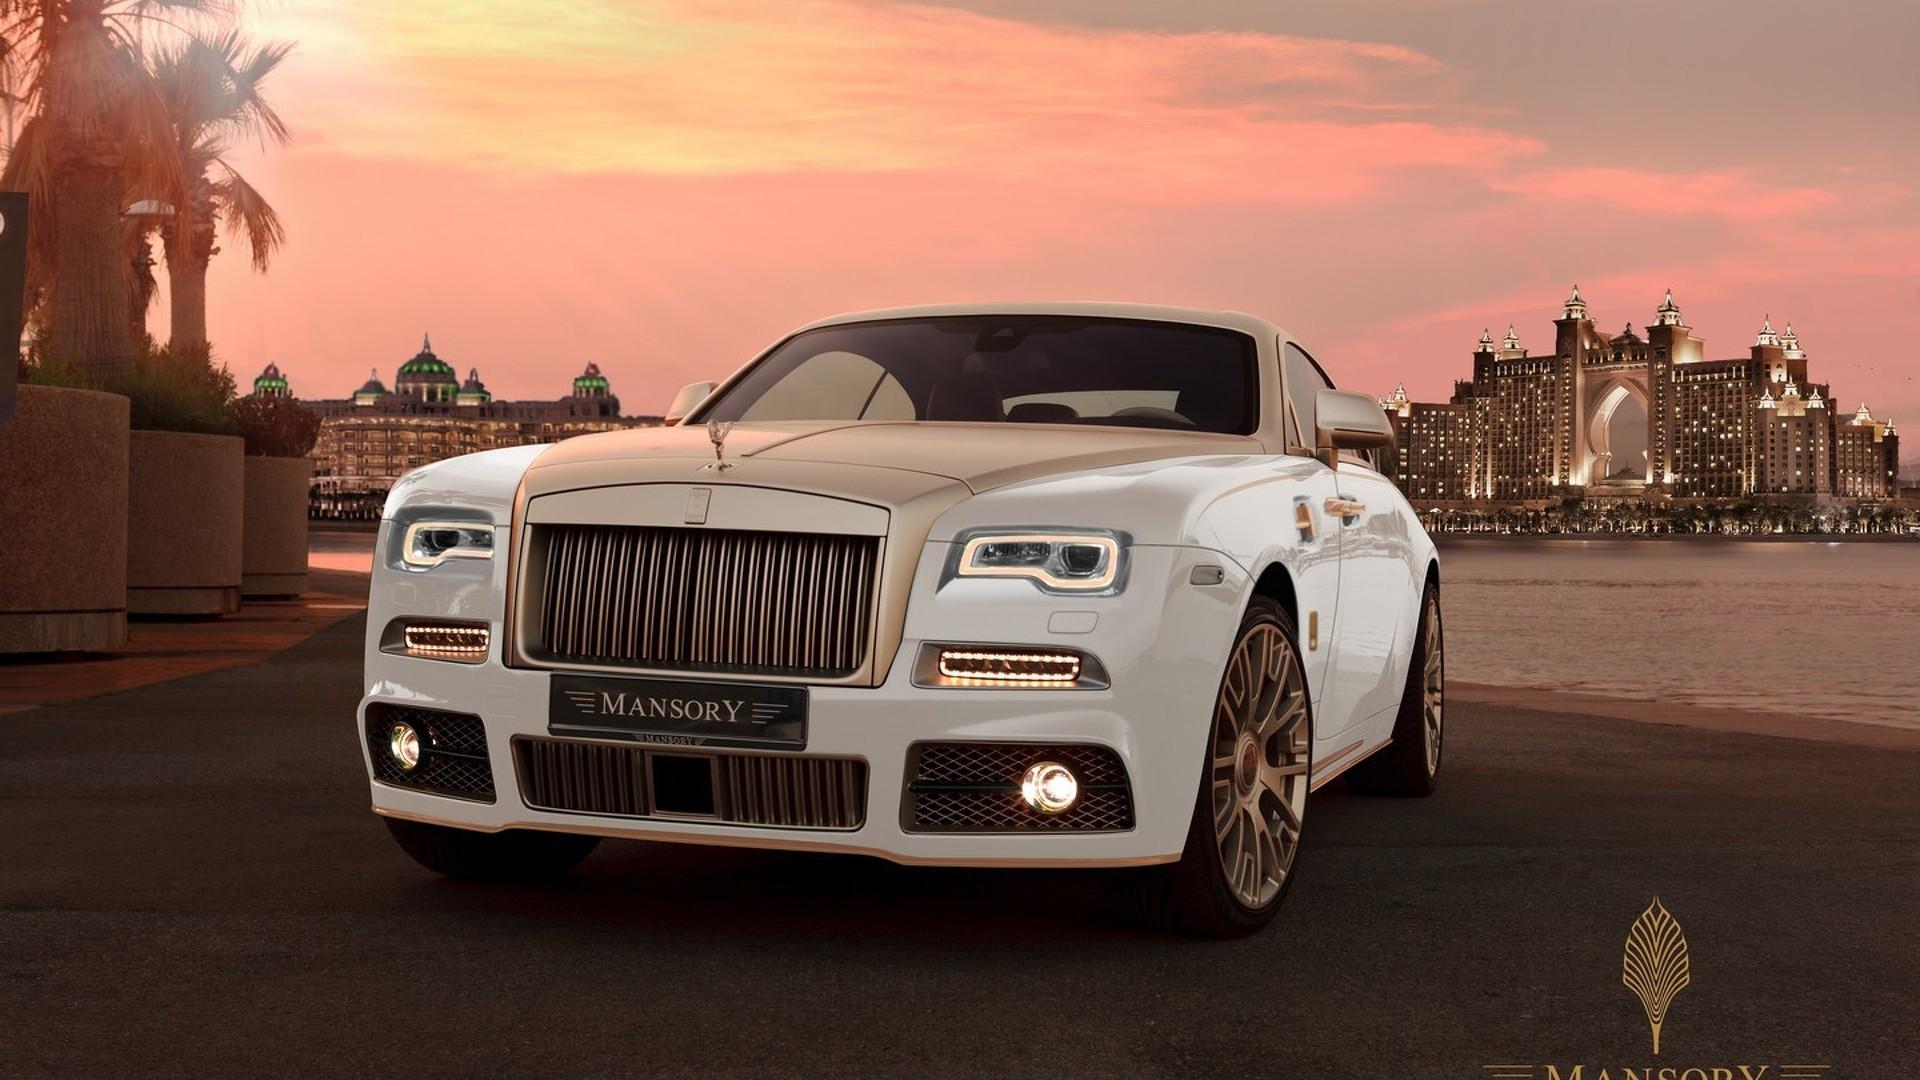 Mansory Uses Gold To Make Rolls Royce Wraith More Opulent